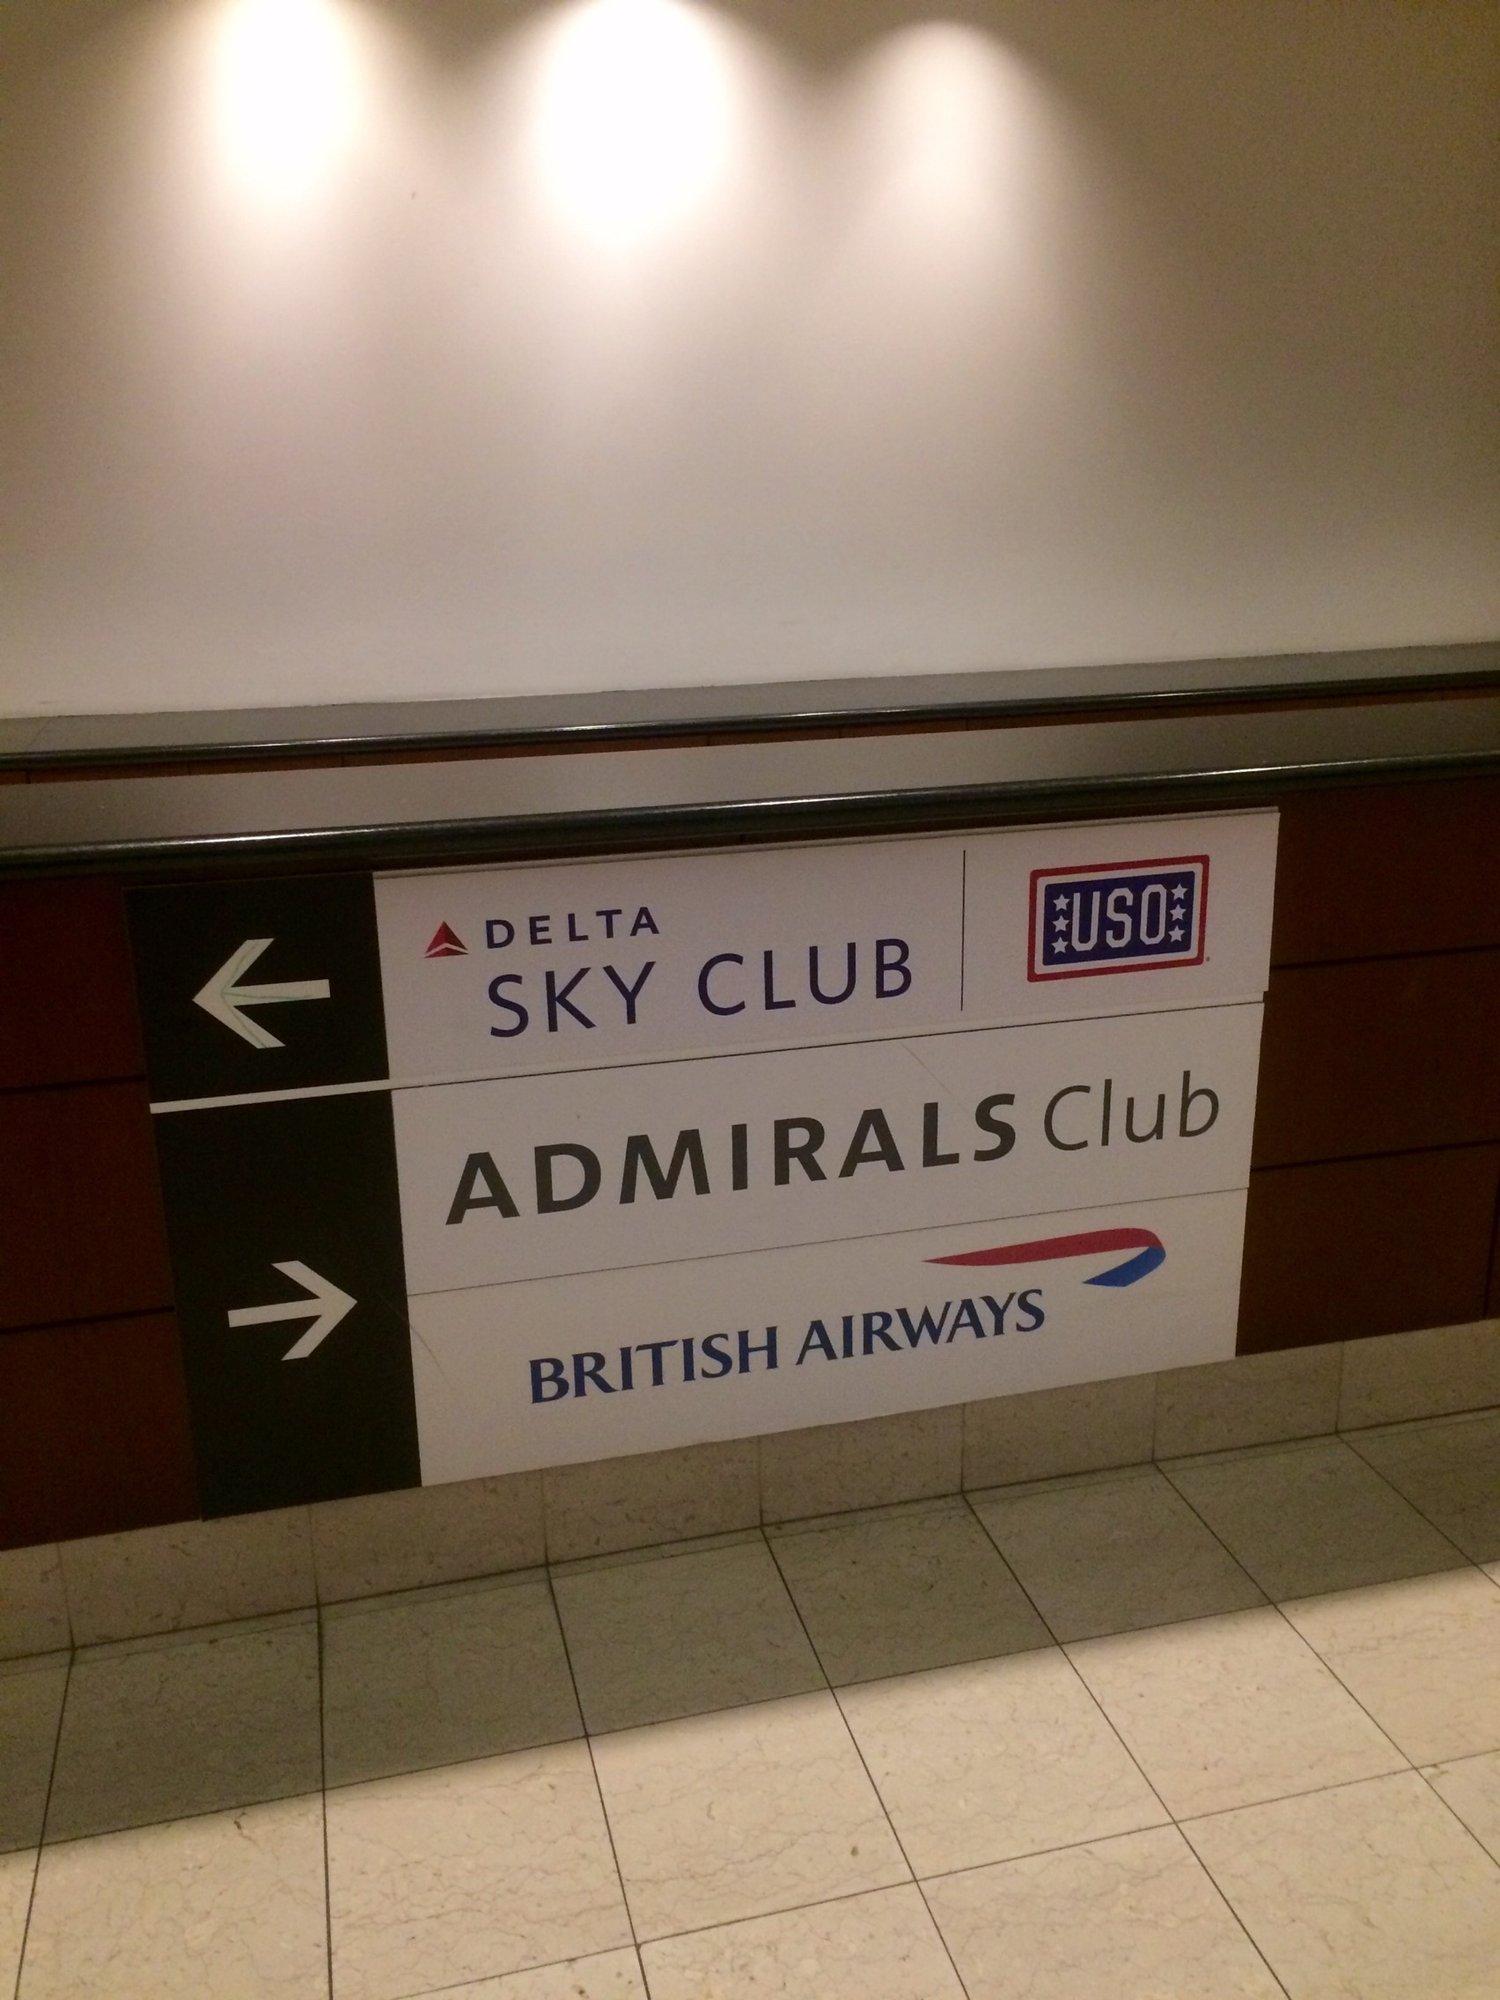 American Airlines Admirals Club image 10 of 12